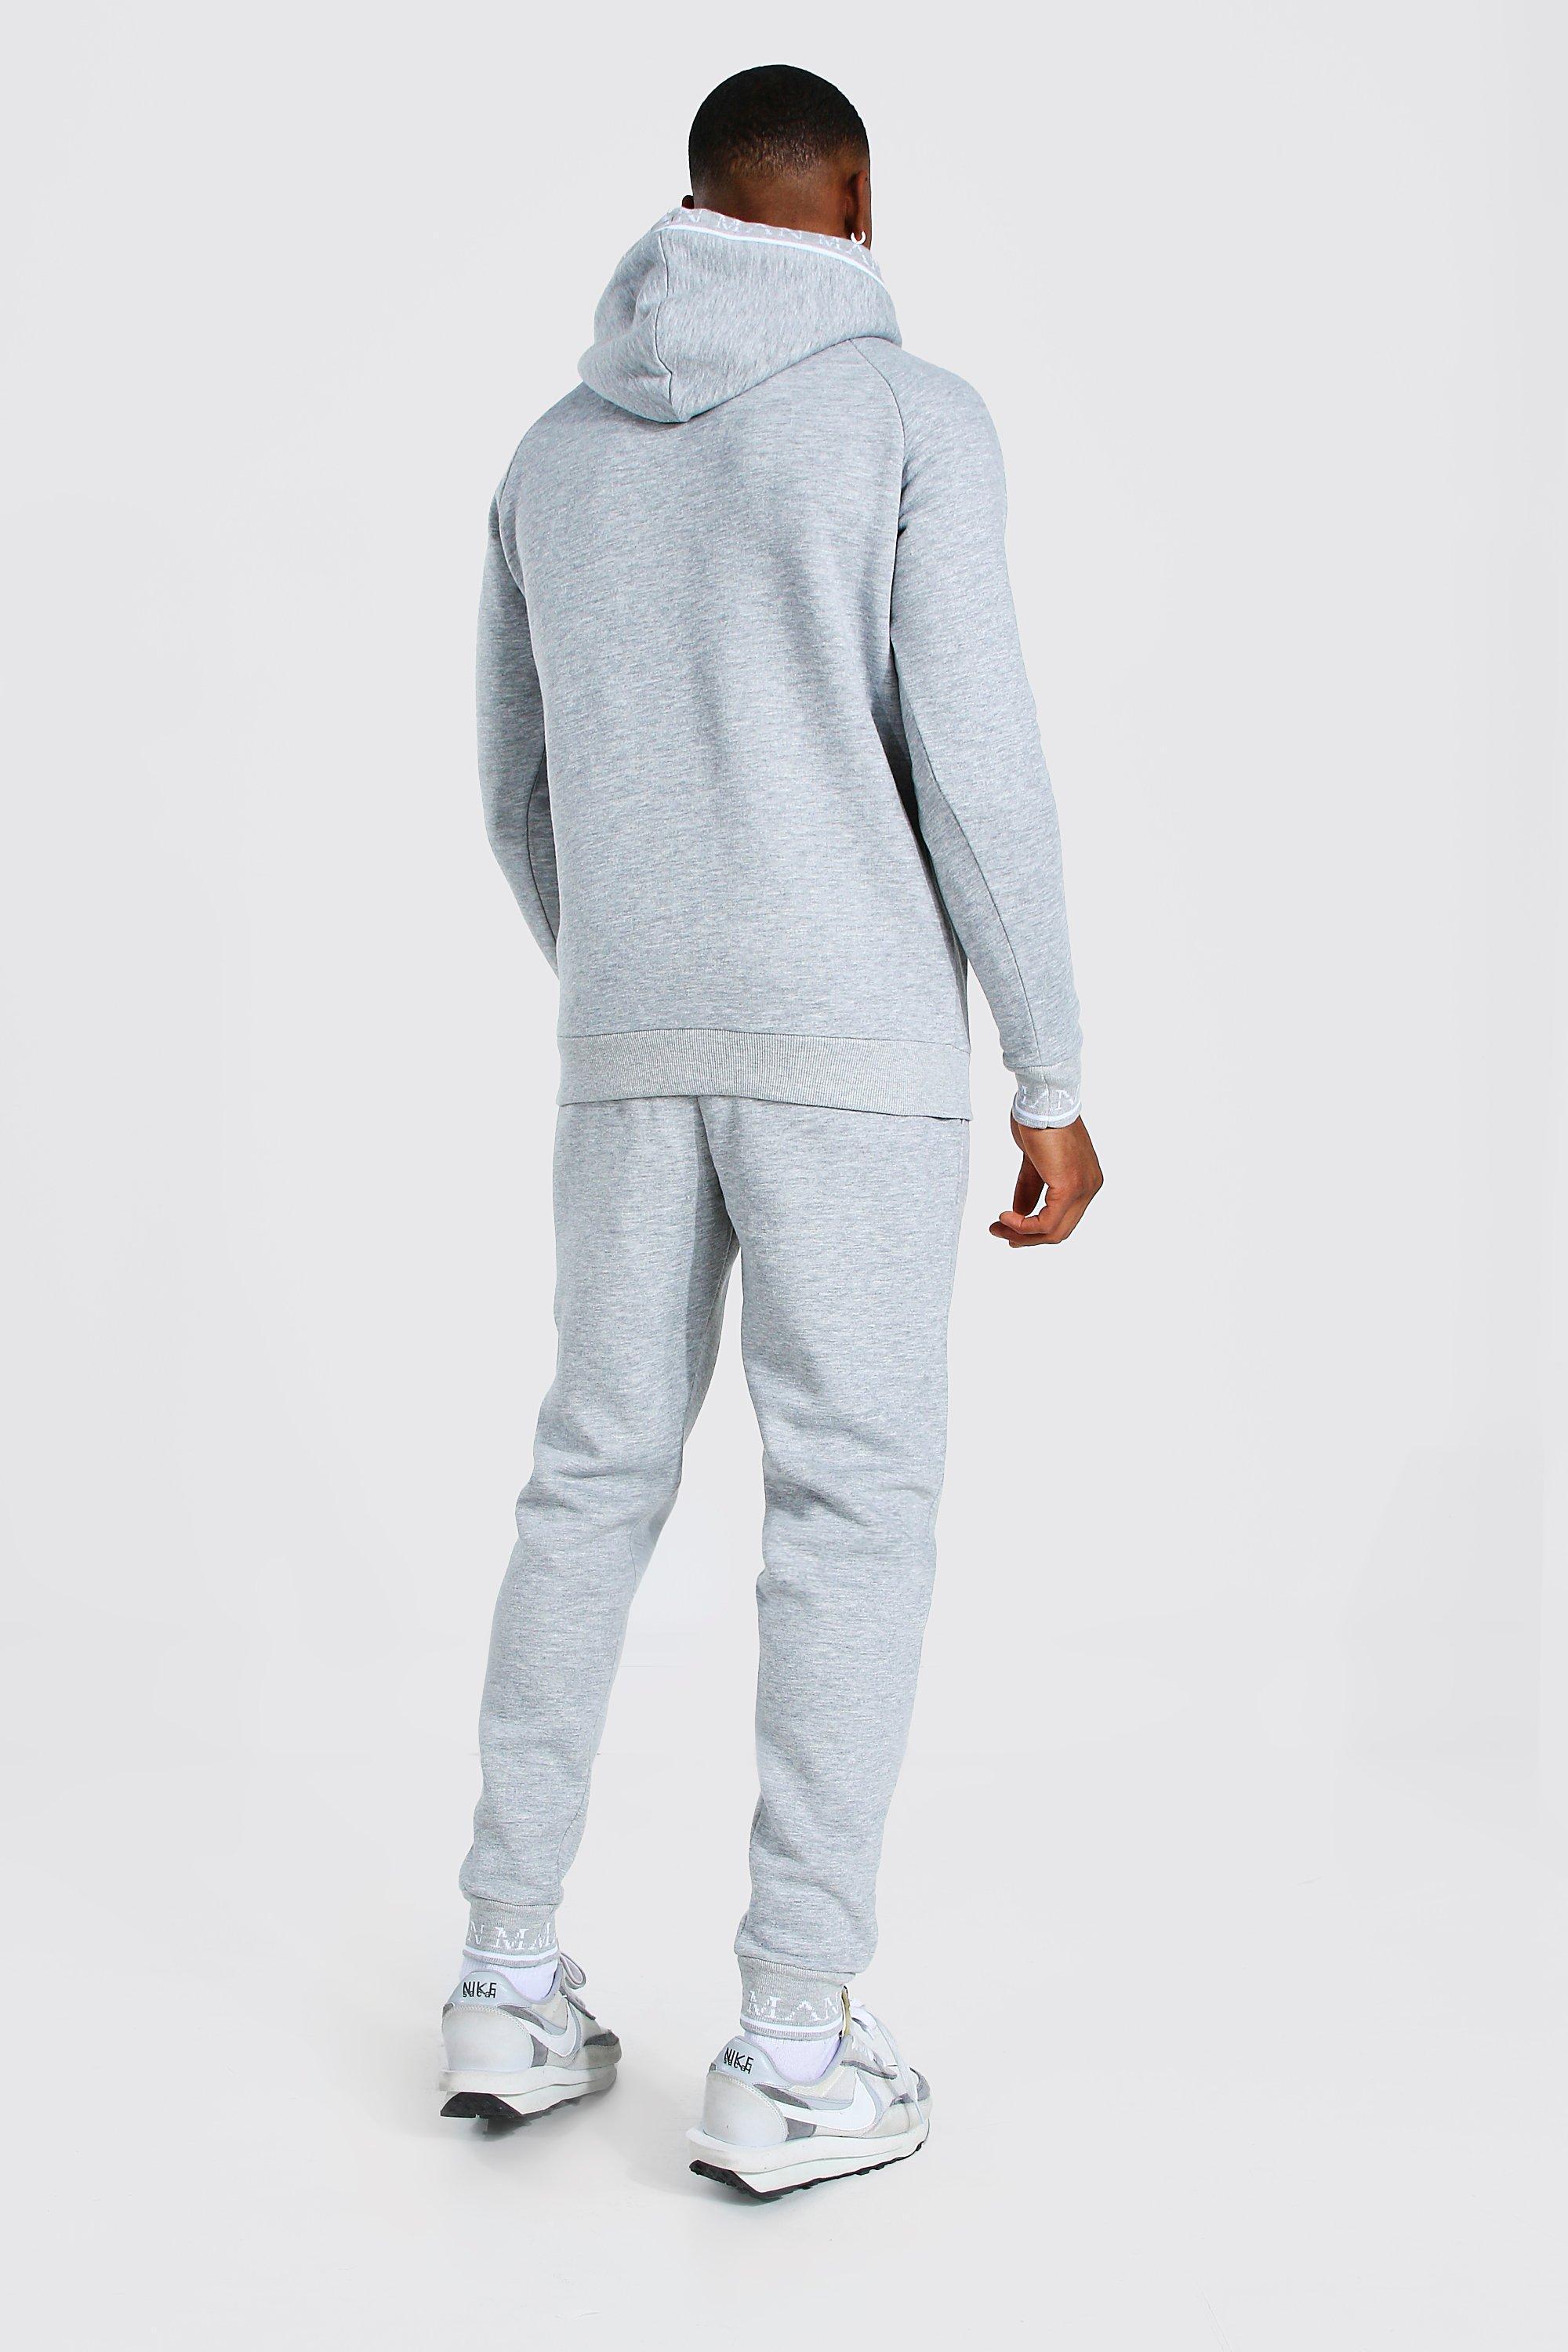 BoohooMAN Synthetic Man Roman Hooded Rib Tracksuit in Grey (Gray) for ...